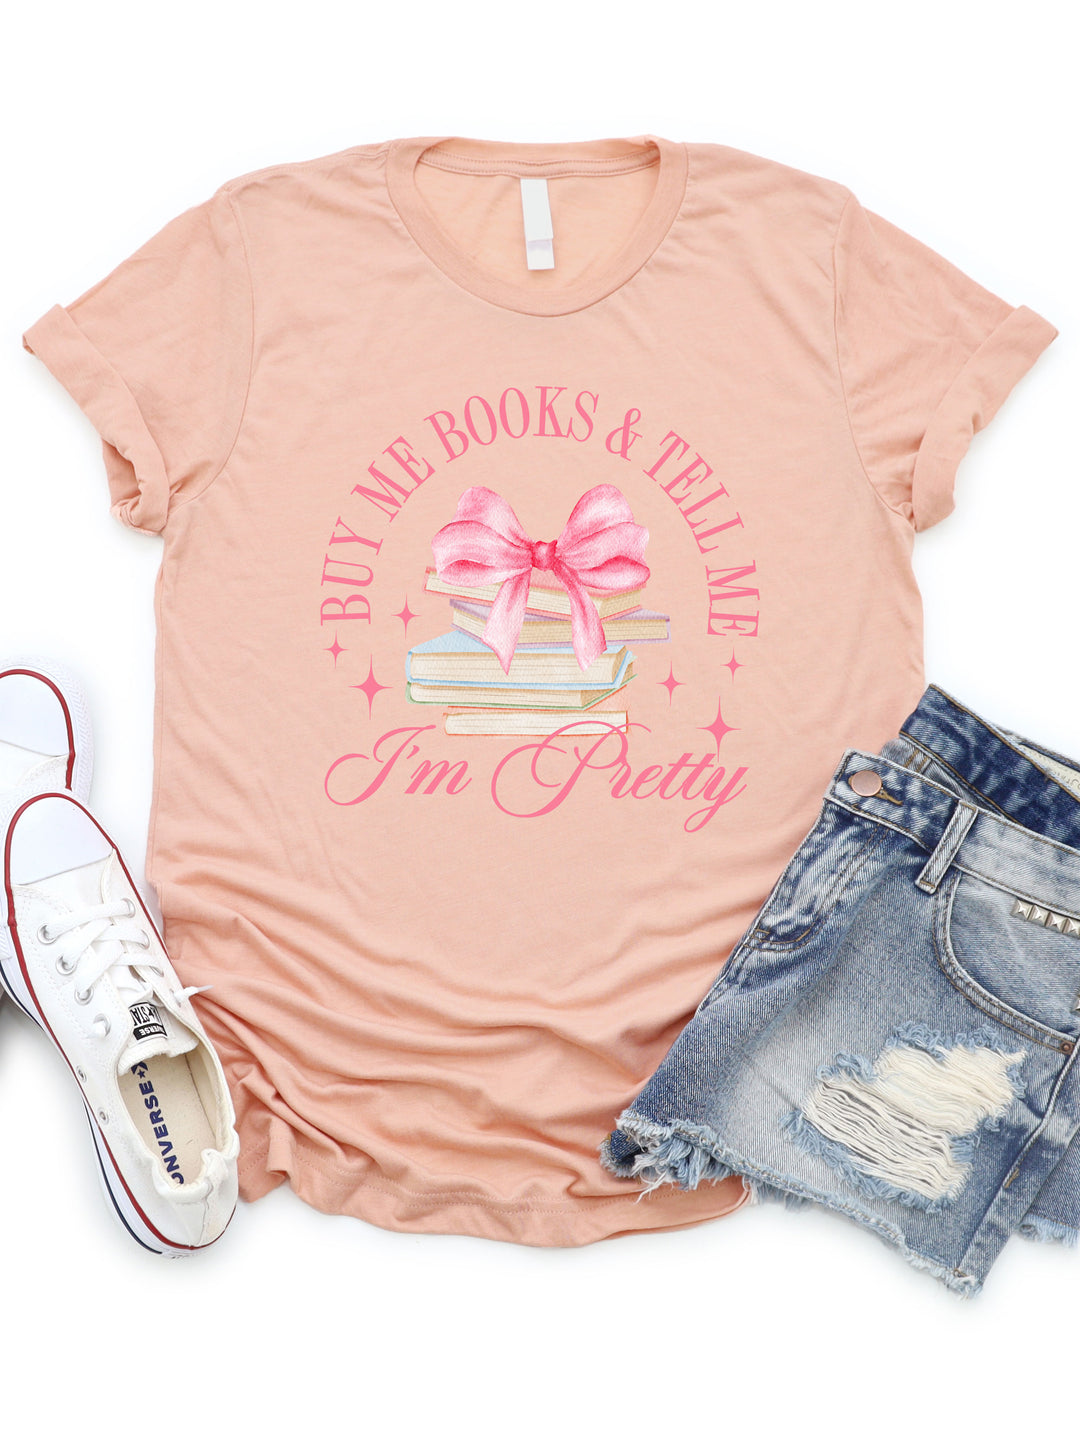 Buy Me Books and Tell Me I'm Pretty - Graphic Tee